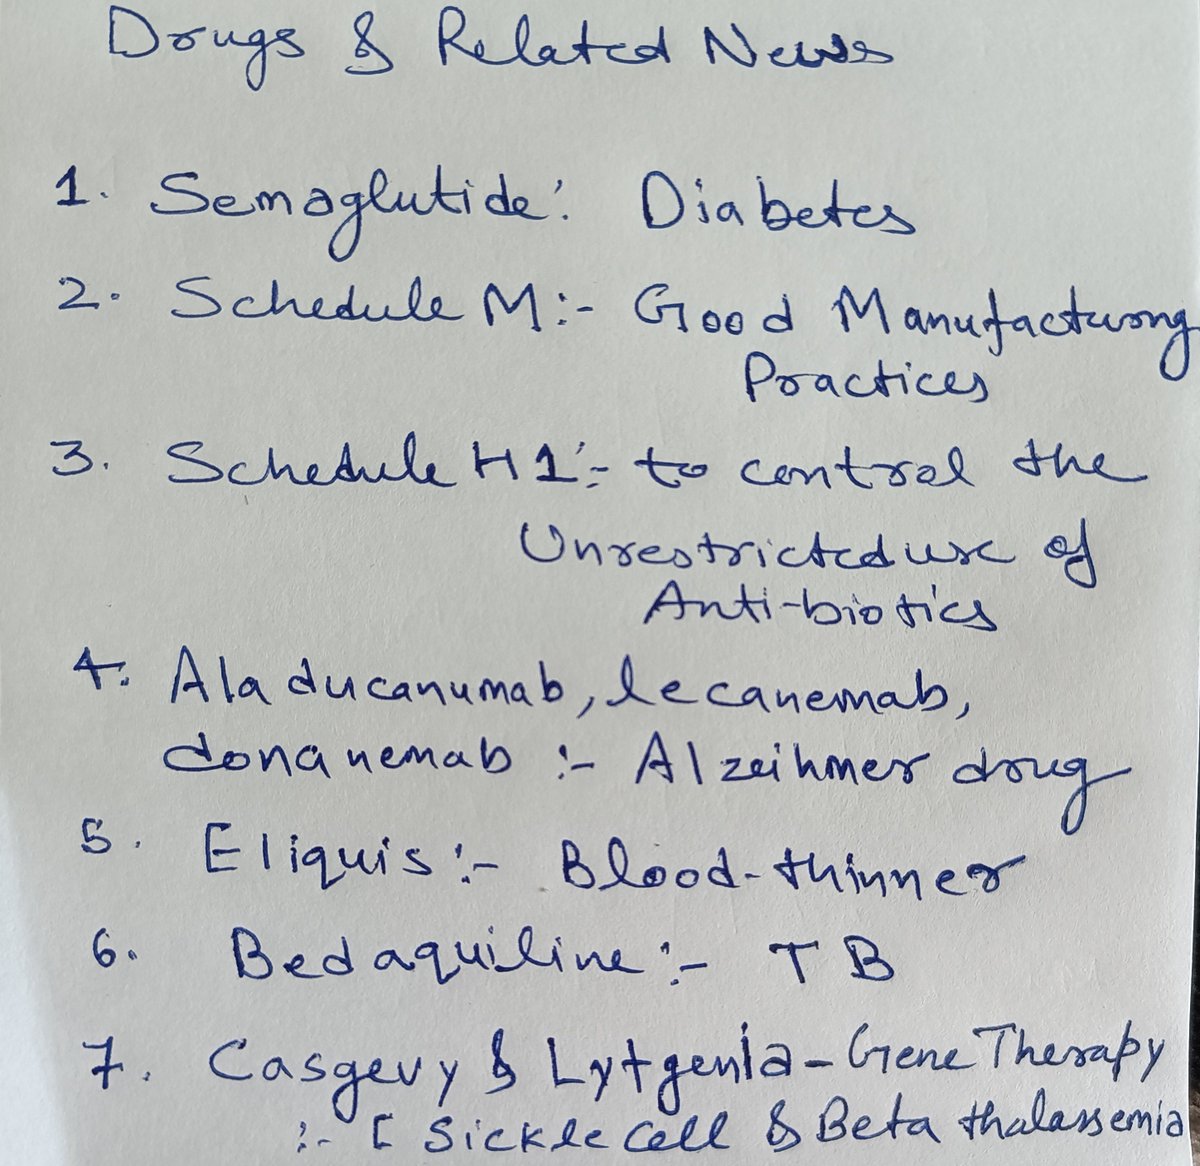 ✅ Drugs & Related News: 

 Name: Some Insights🗒️

• Semaglutide: sold as a magic drug for weight loss
• Schedule M: Mfg. practices
• Schedule H1: Anti-microbial resistance 
• Casgevy & Lyfgenia: 🏳️1st Gene therapy( 🇺🇲 US & UK 🇬🇧)
• Bedaquiline(DR,MDR): Secondary patent